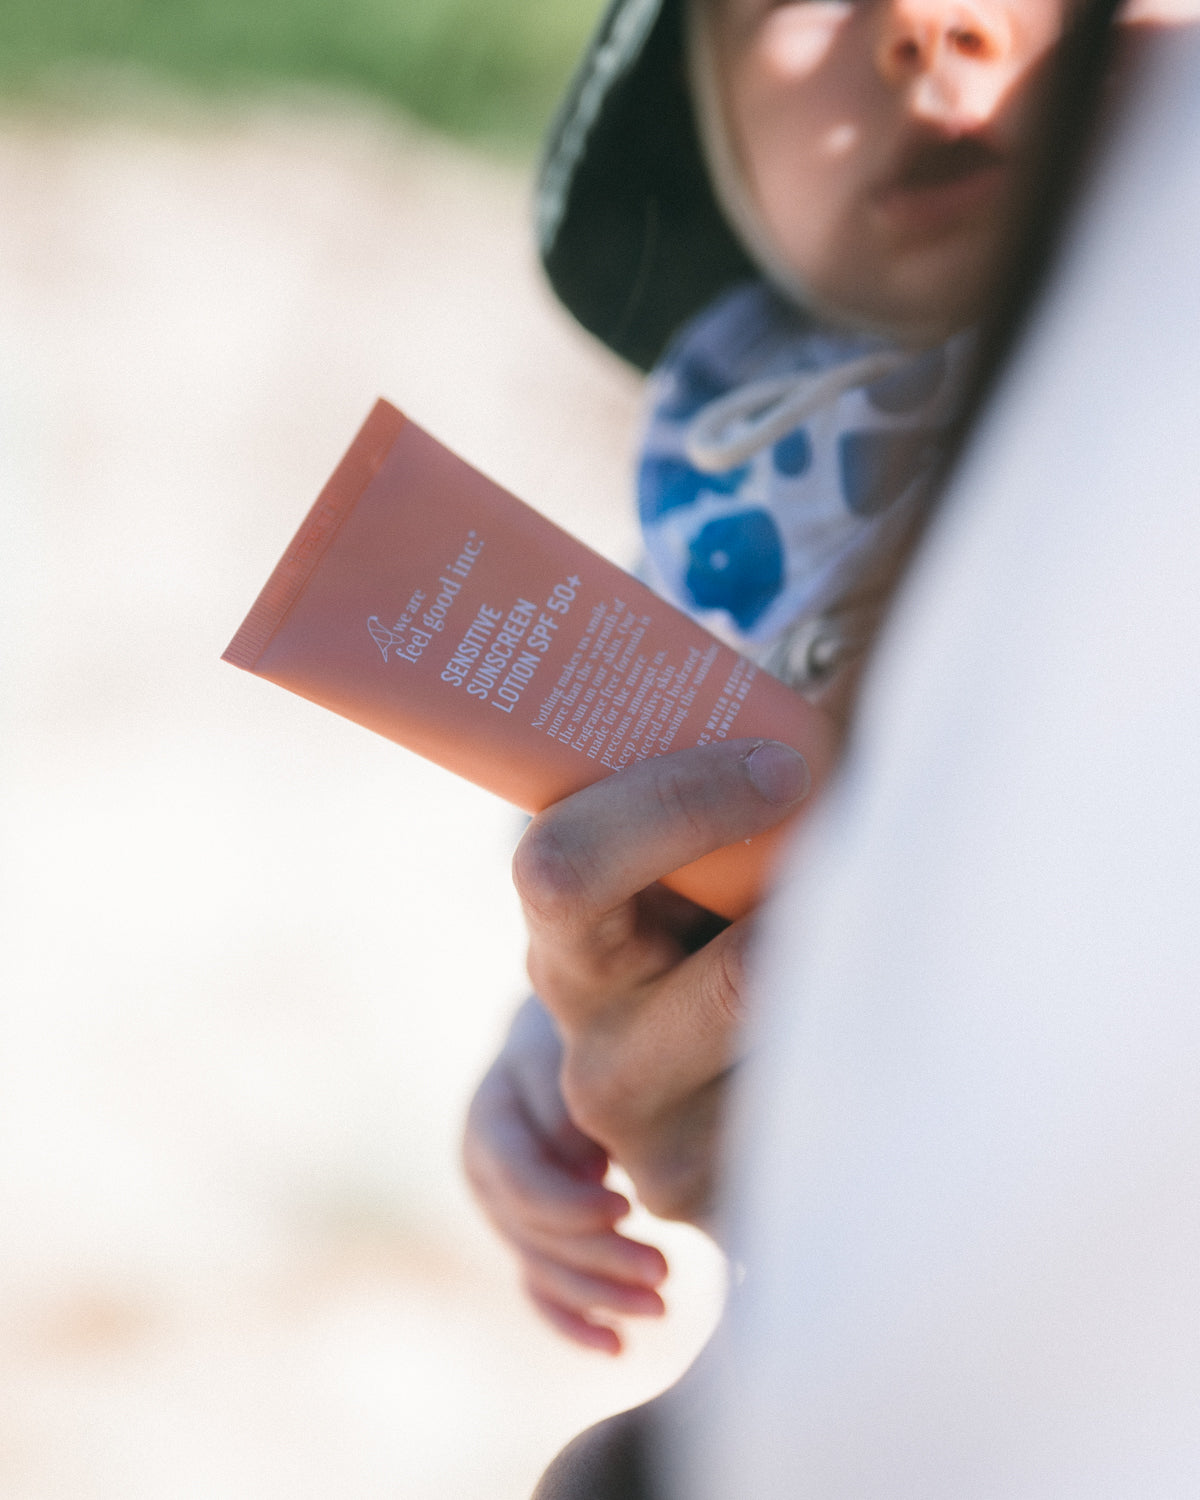 A person's hand is holding an orange tube of We Are Feel Good Inc. Sensitive Sunscreen SPF 50+